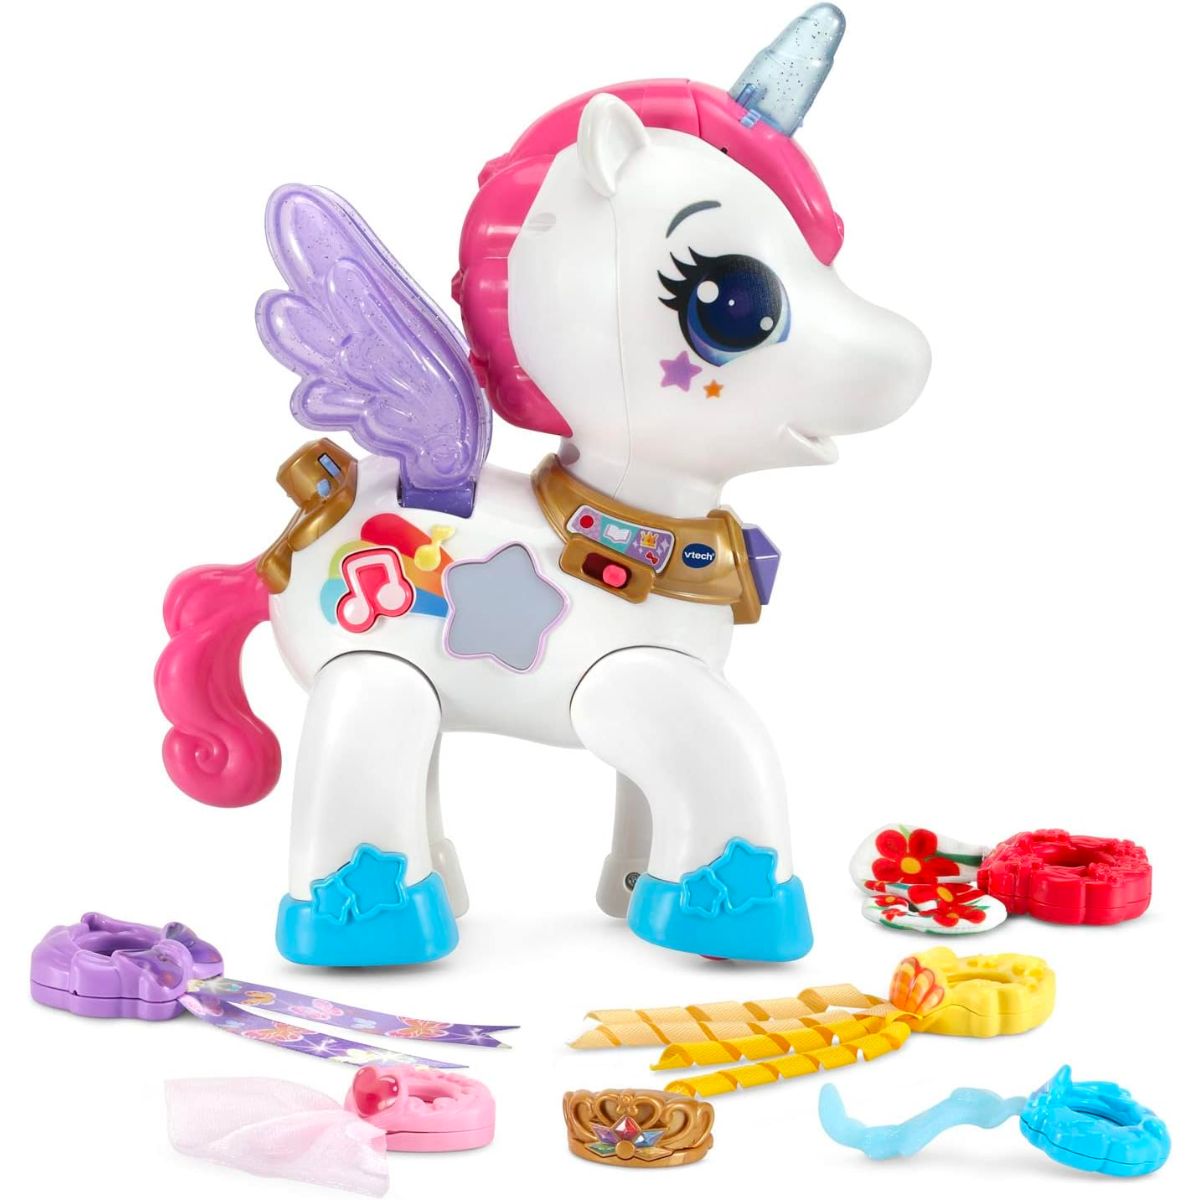 vtech glam on unicorn with accessories on white background